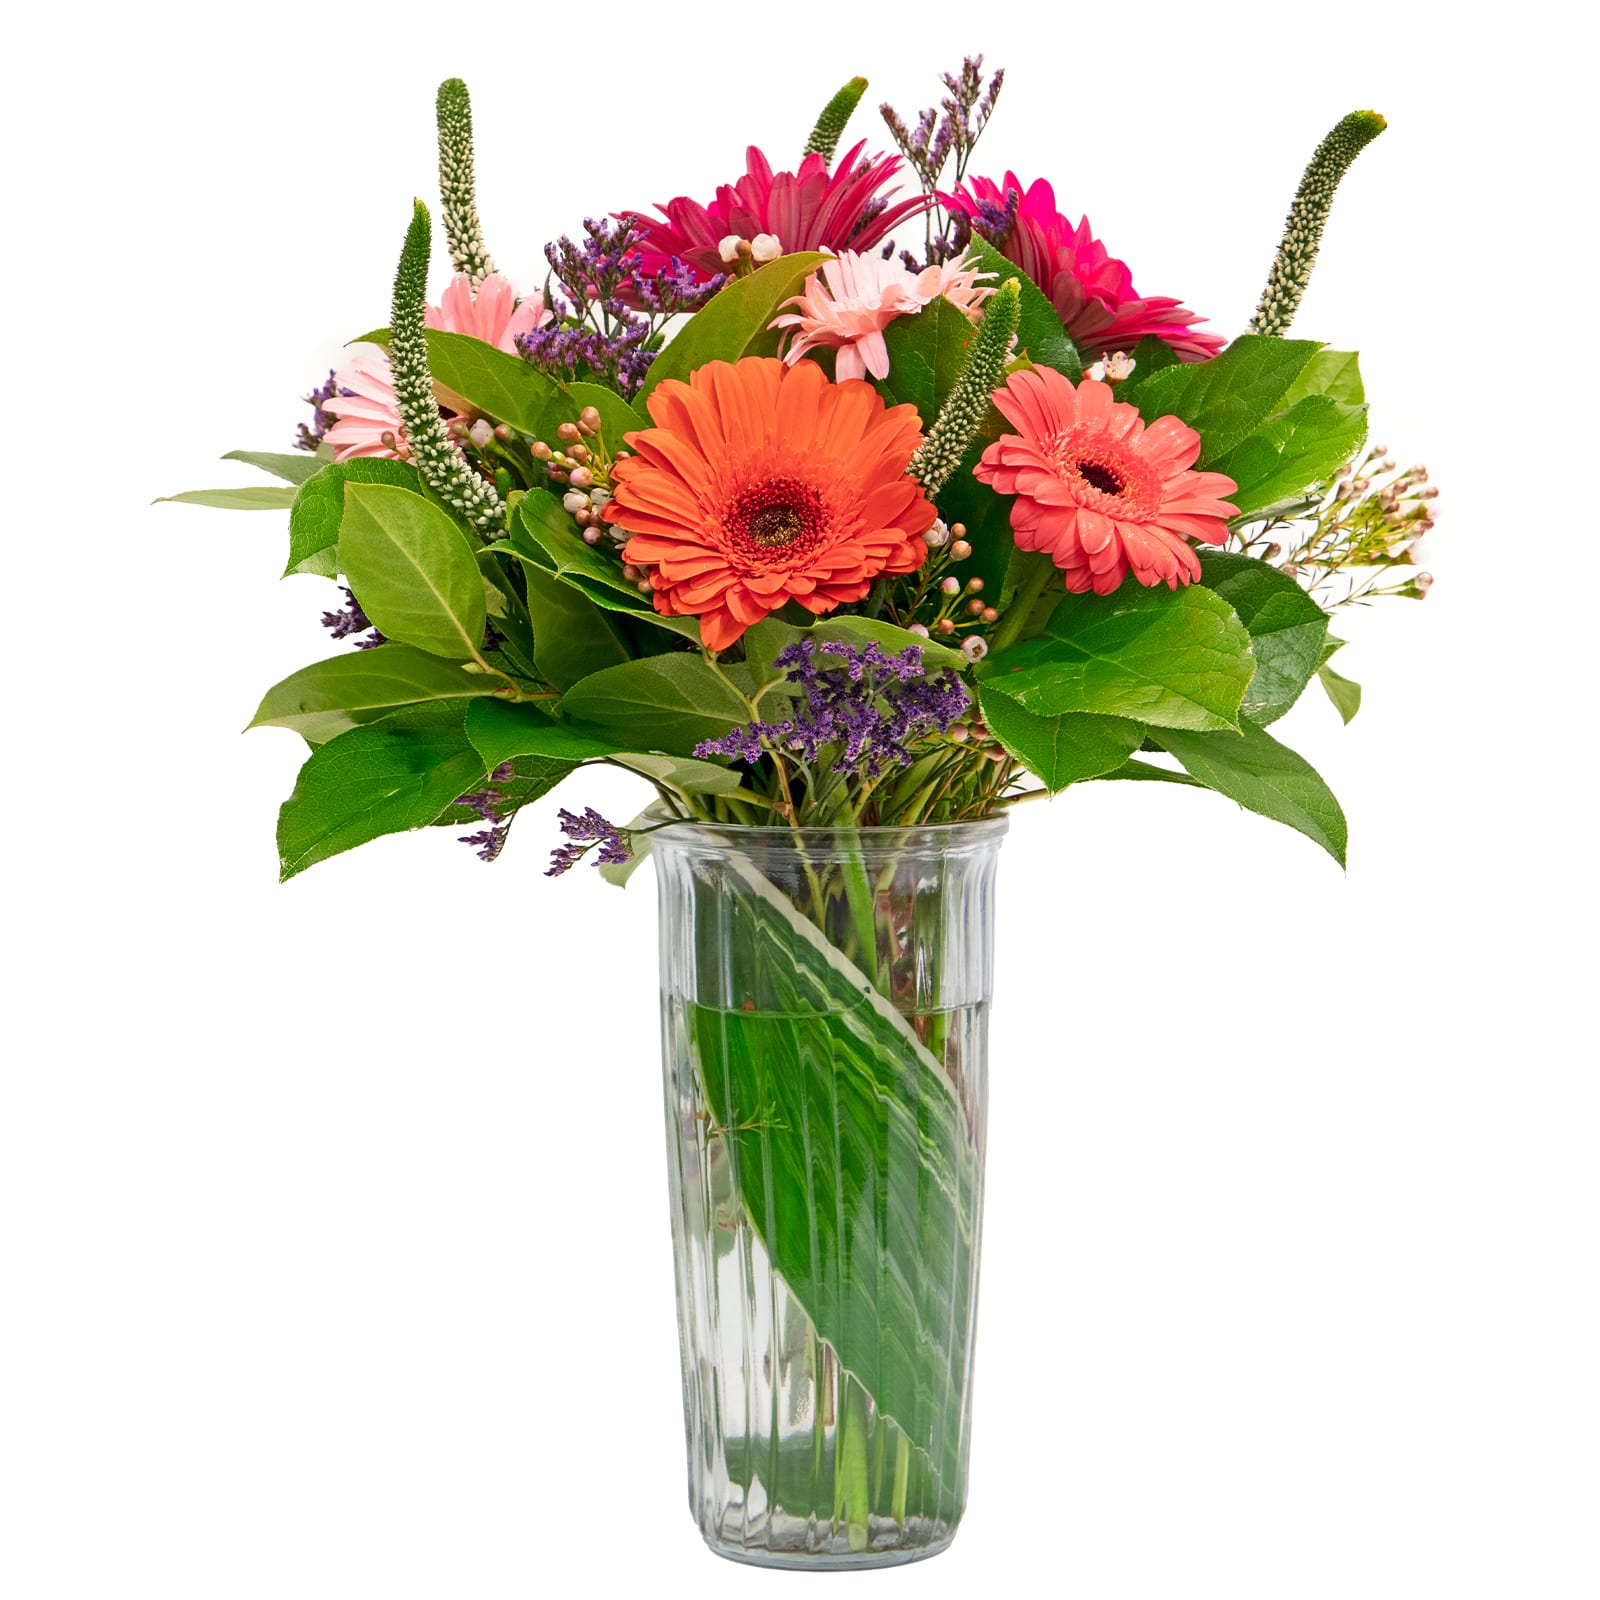 Harry and Sally  - A bright and vibrant mix of gorgeous Gerber Daisy 